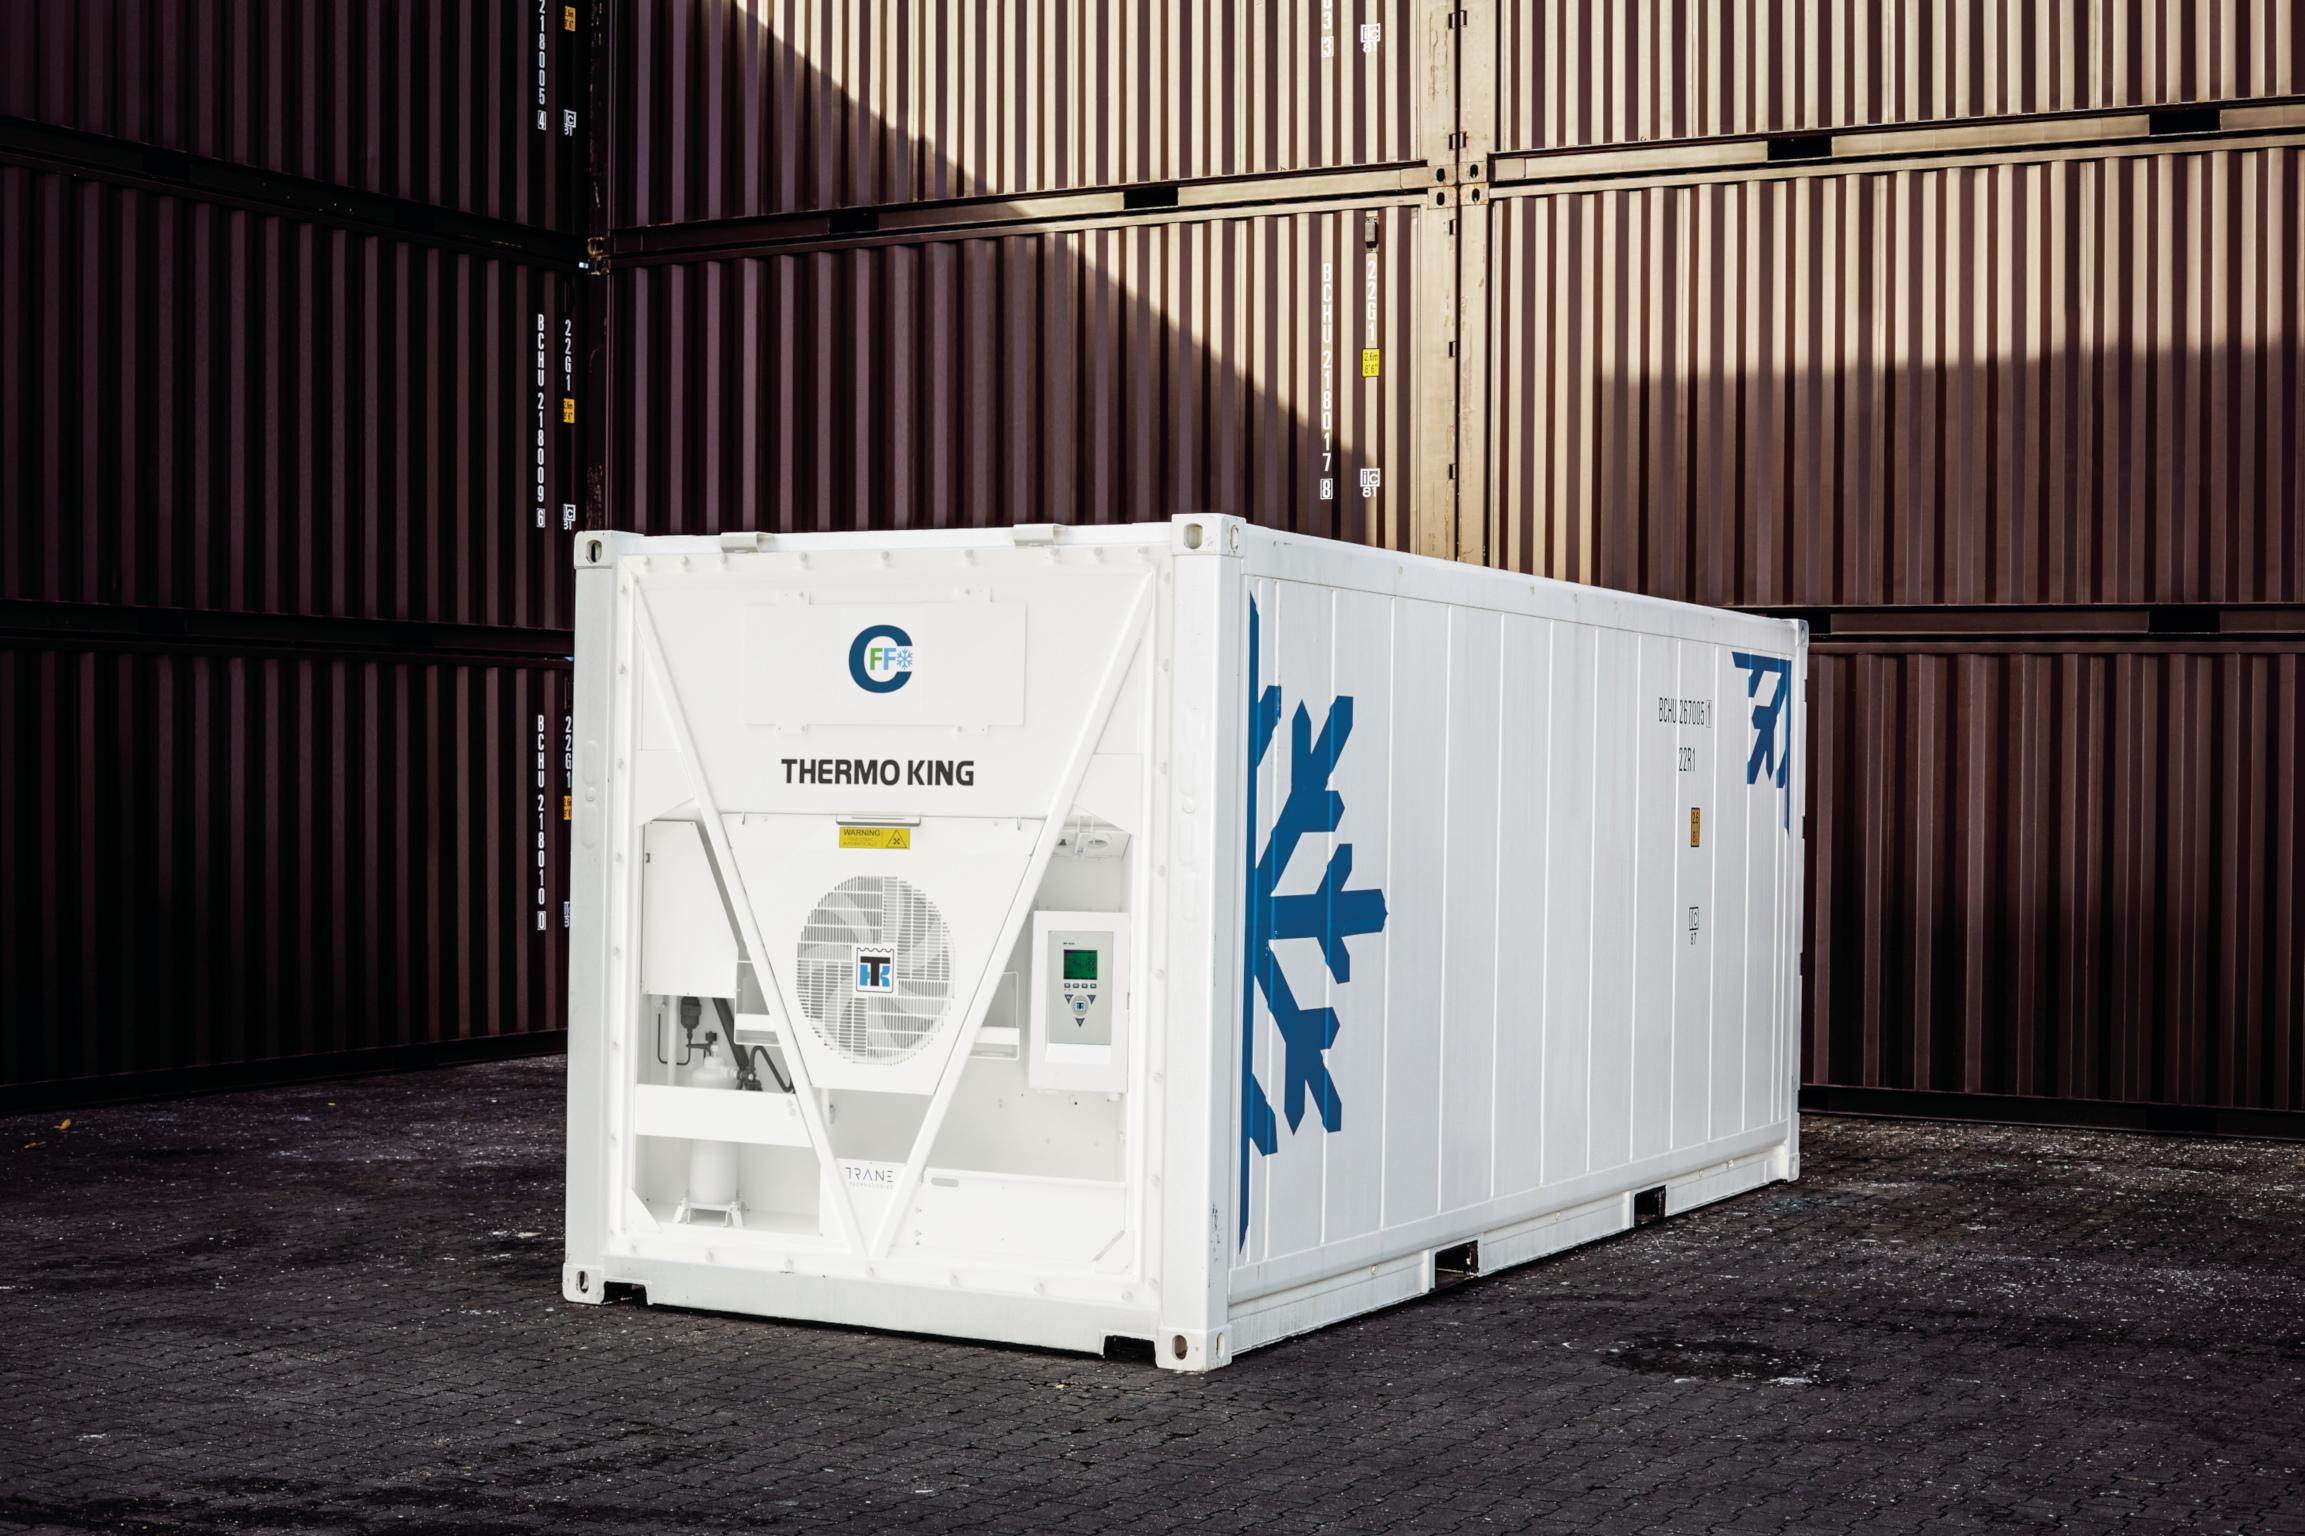 Thermo Kings Reefer container fresh and frozen for sale or hire in Antwerp, Belgium by ContainerID